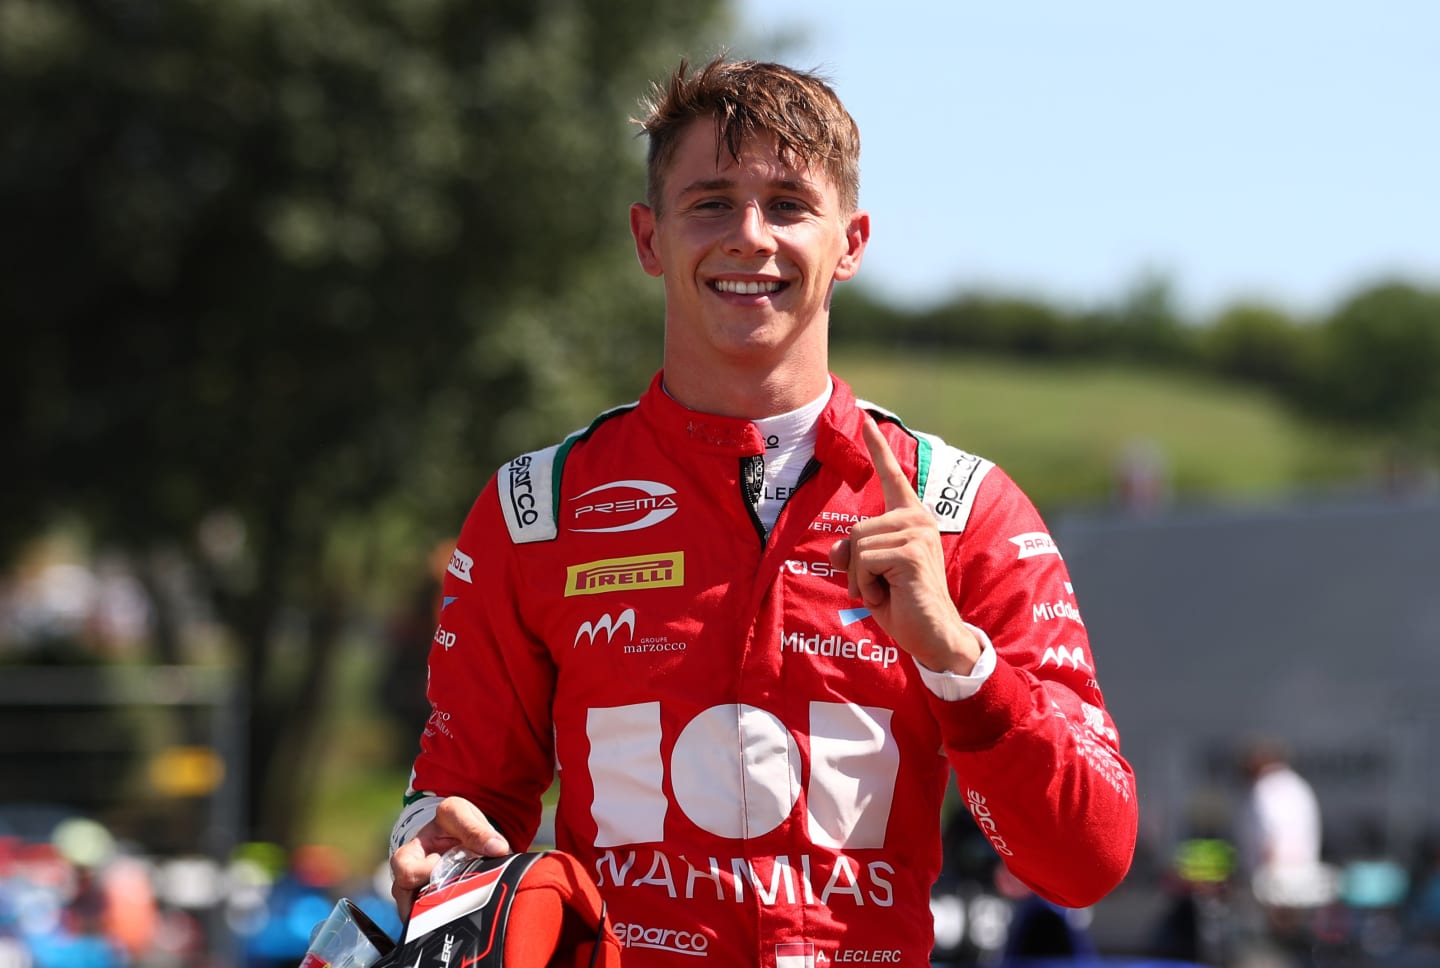 BUDAPEST, HUNGARY - JULY 30: Pole position qualifier Arthur Leclerc of Monaco and Prema Racing